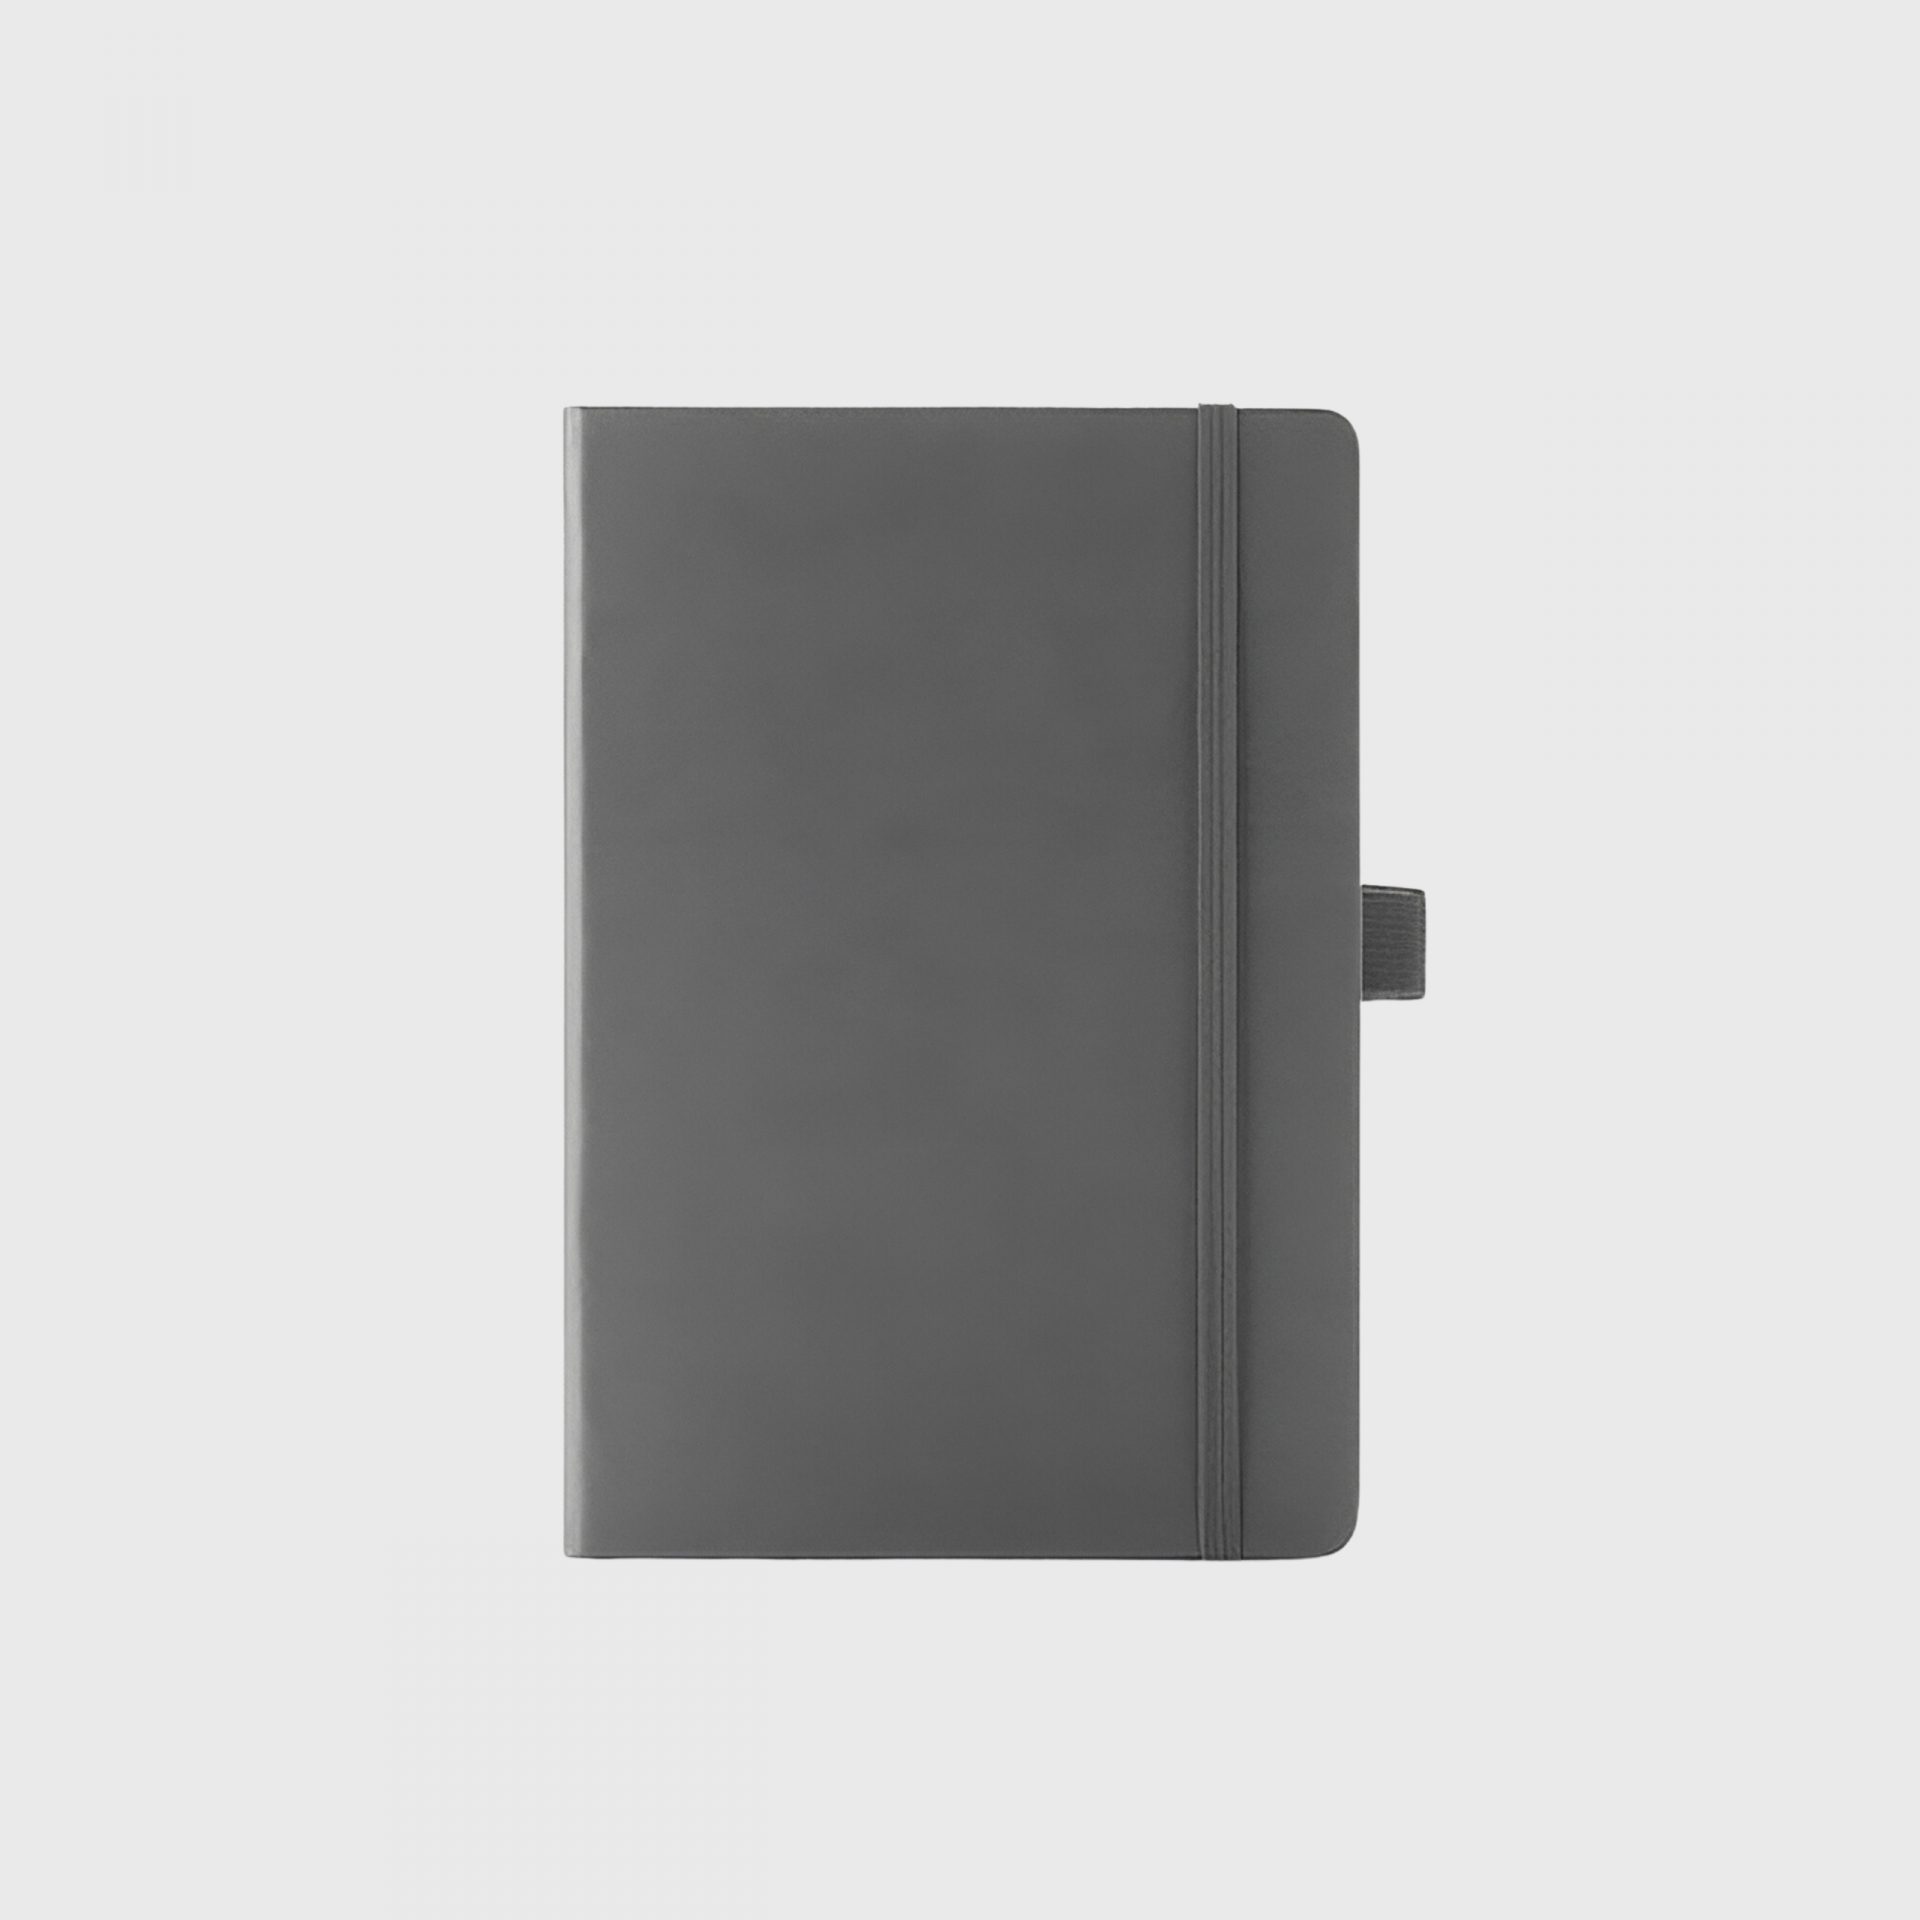 Corporate Gifts Singapore Notebook A5 Soft PU Leather Hard Cover Grey with pen holder